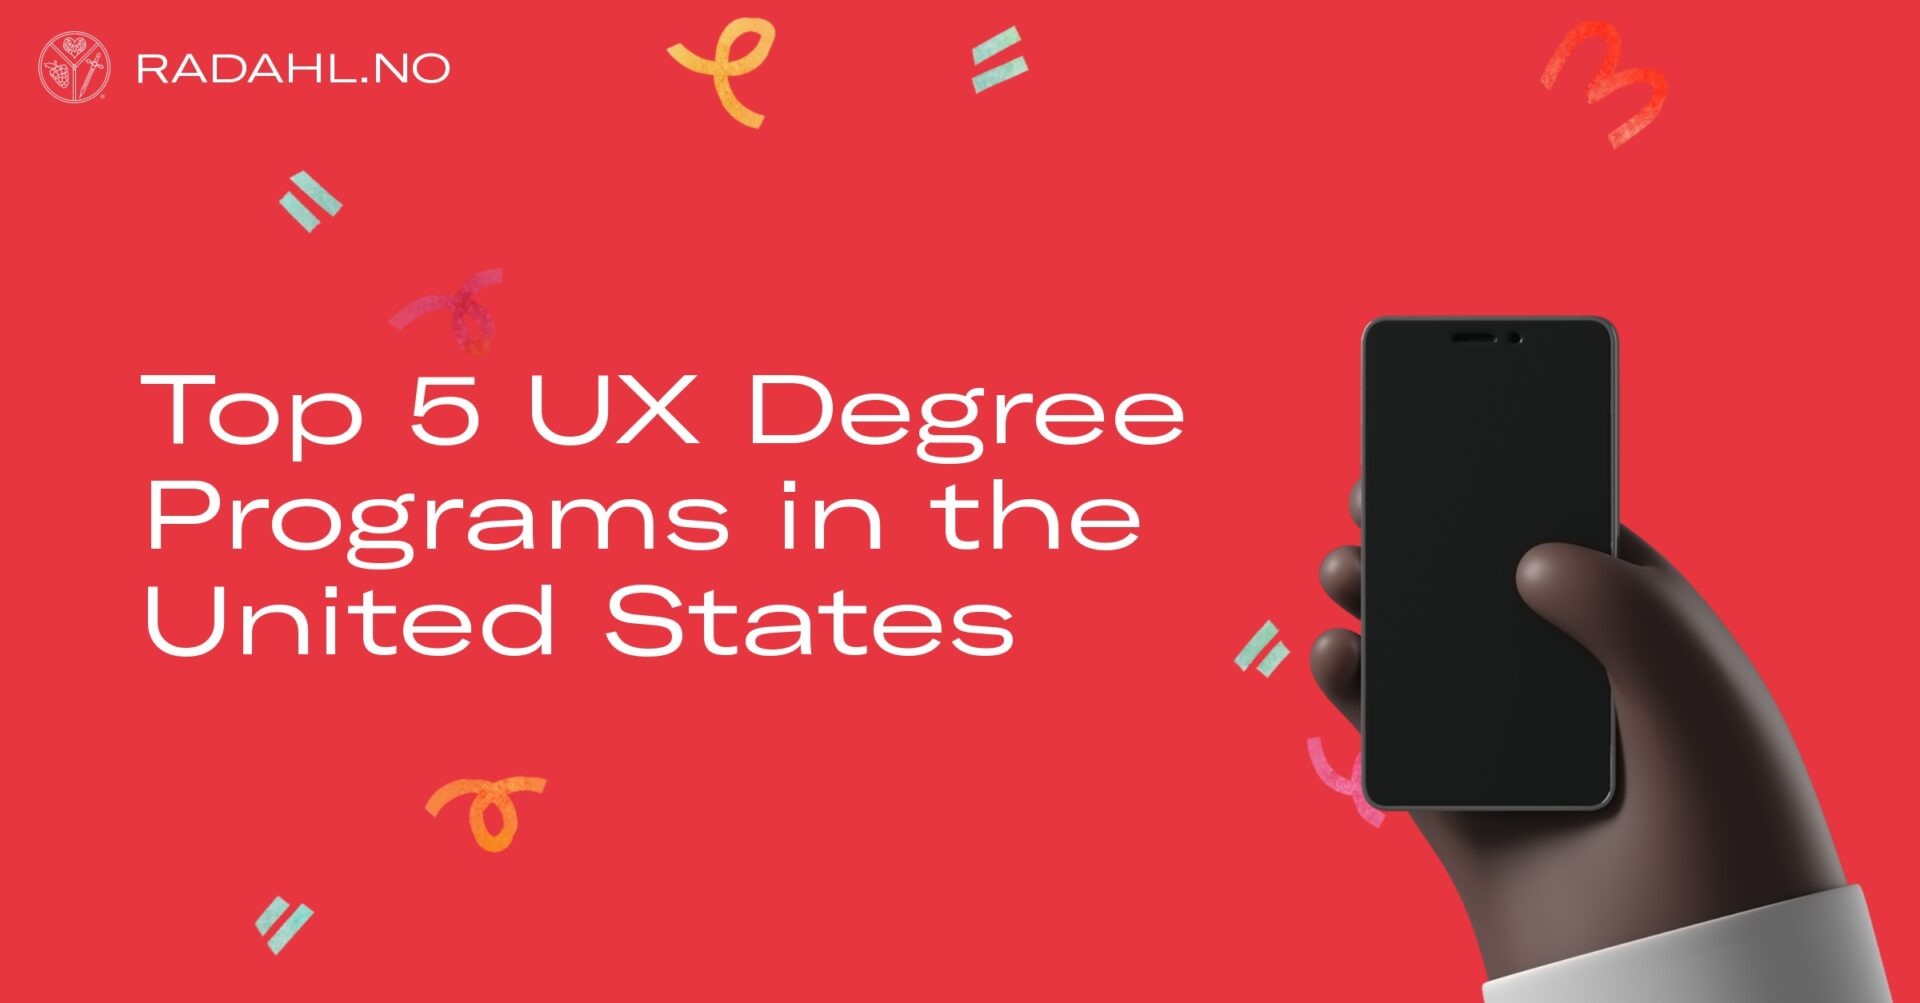 Top 5 ux degree programs in the united states